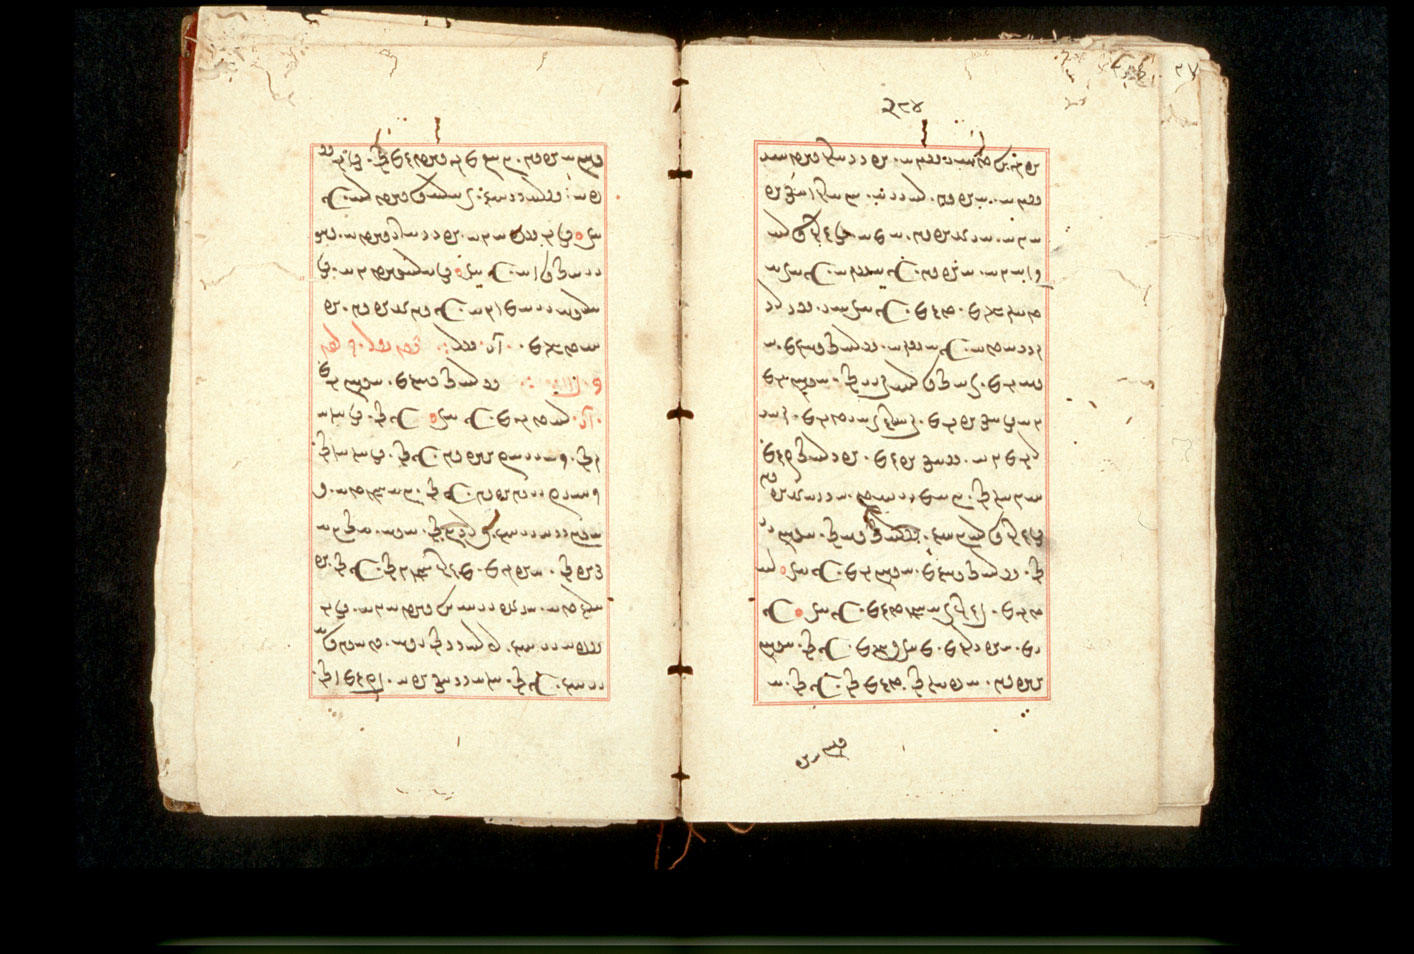 Folios 284v (right) and 285r (left)